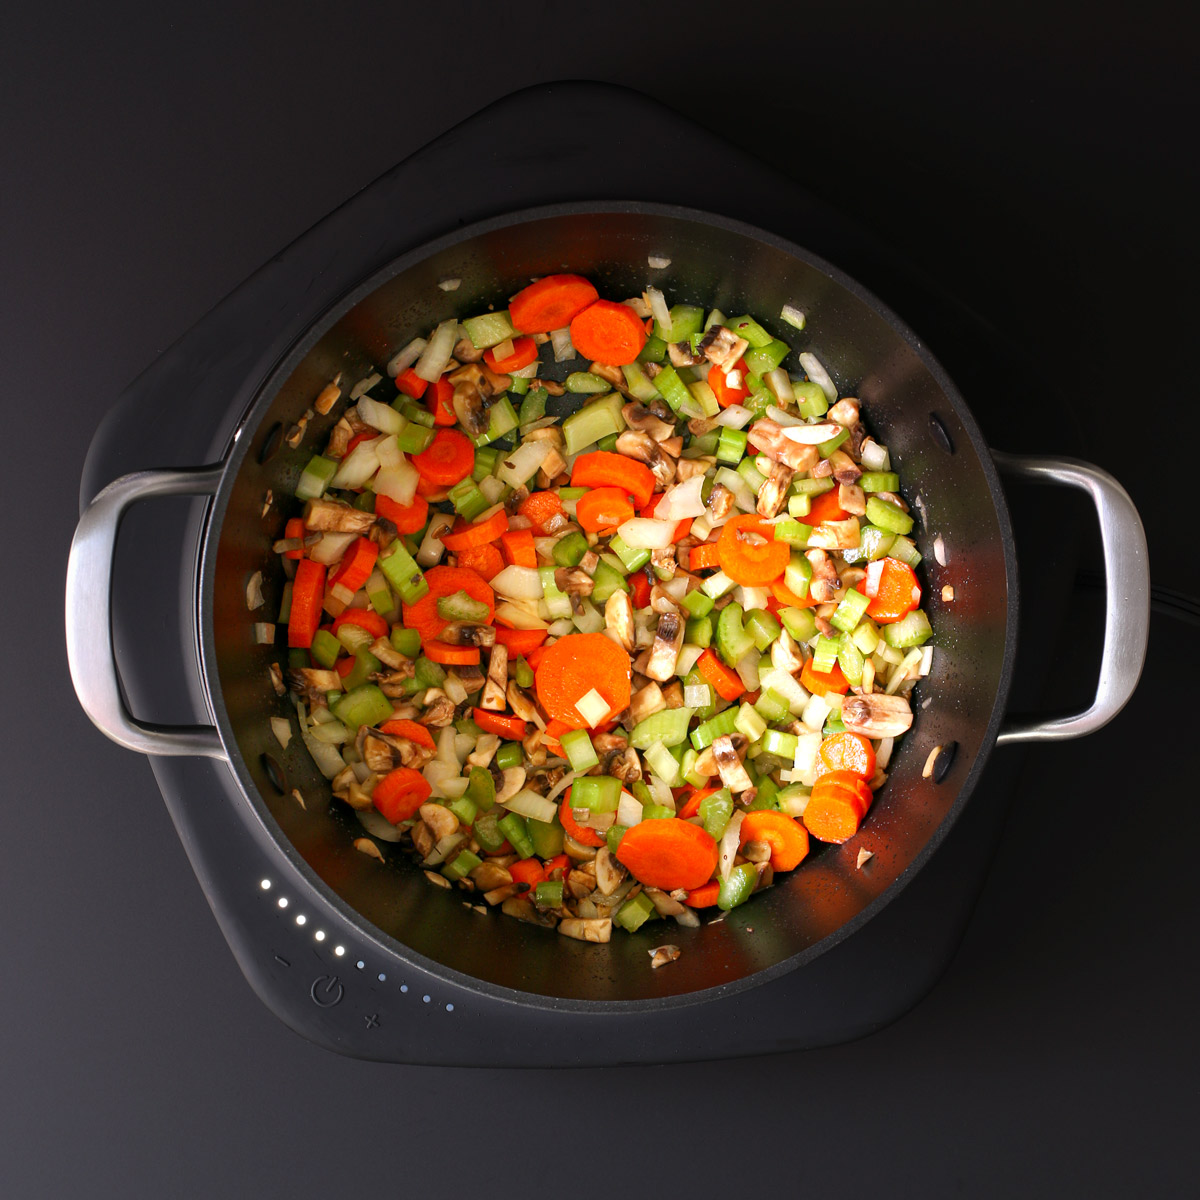 sauteing veggies in the drippings in the pot.